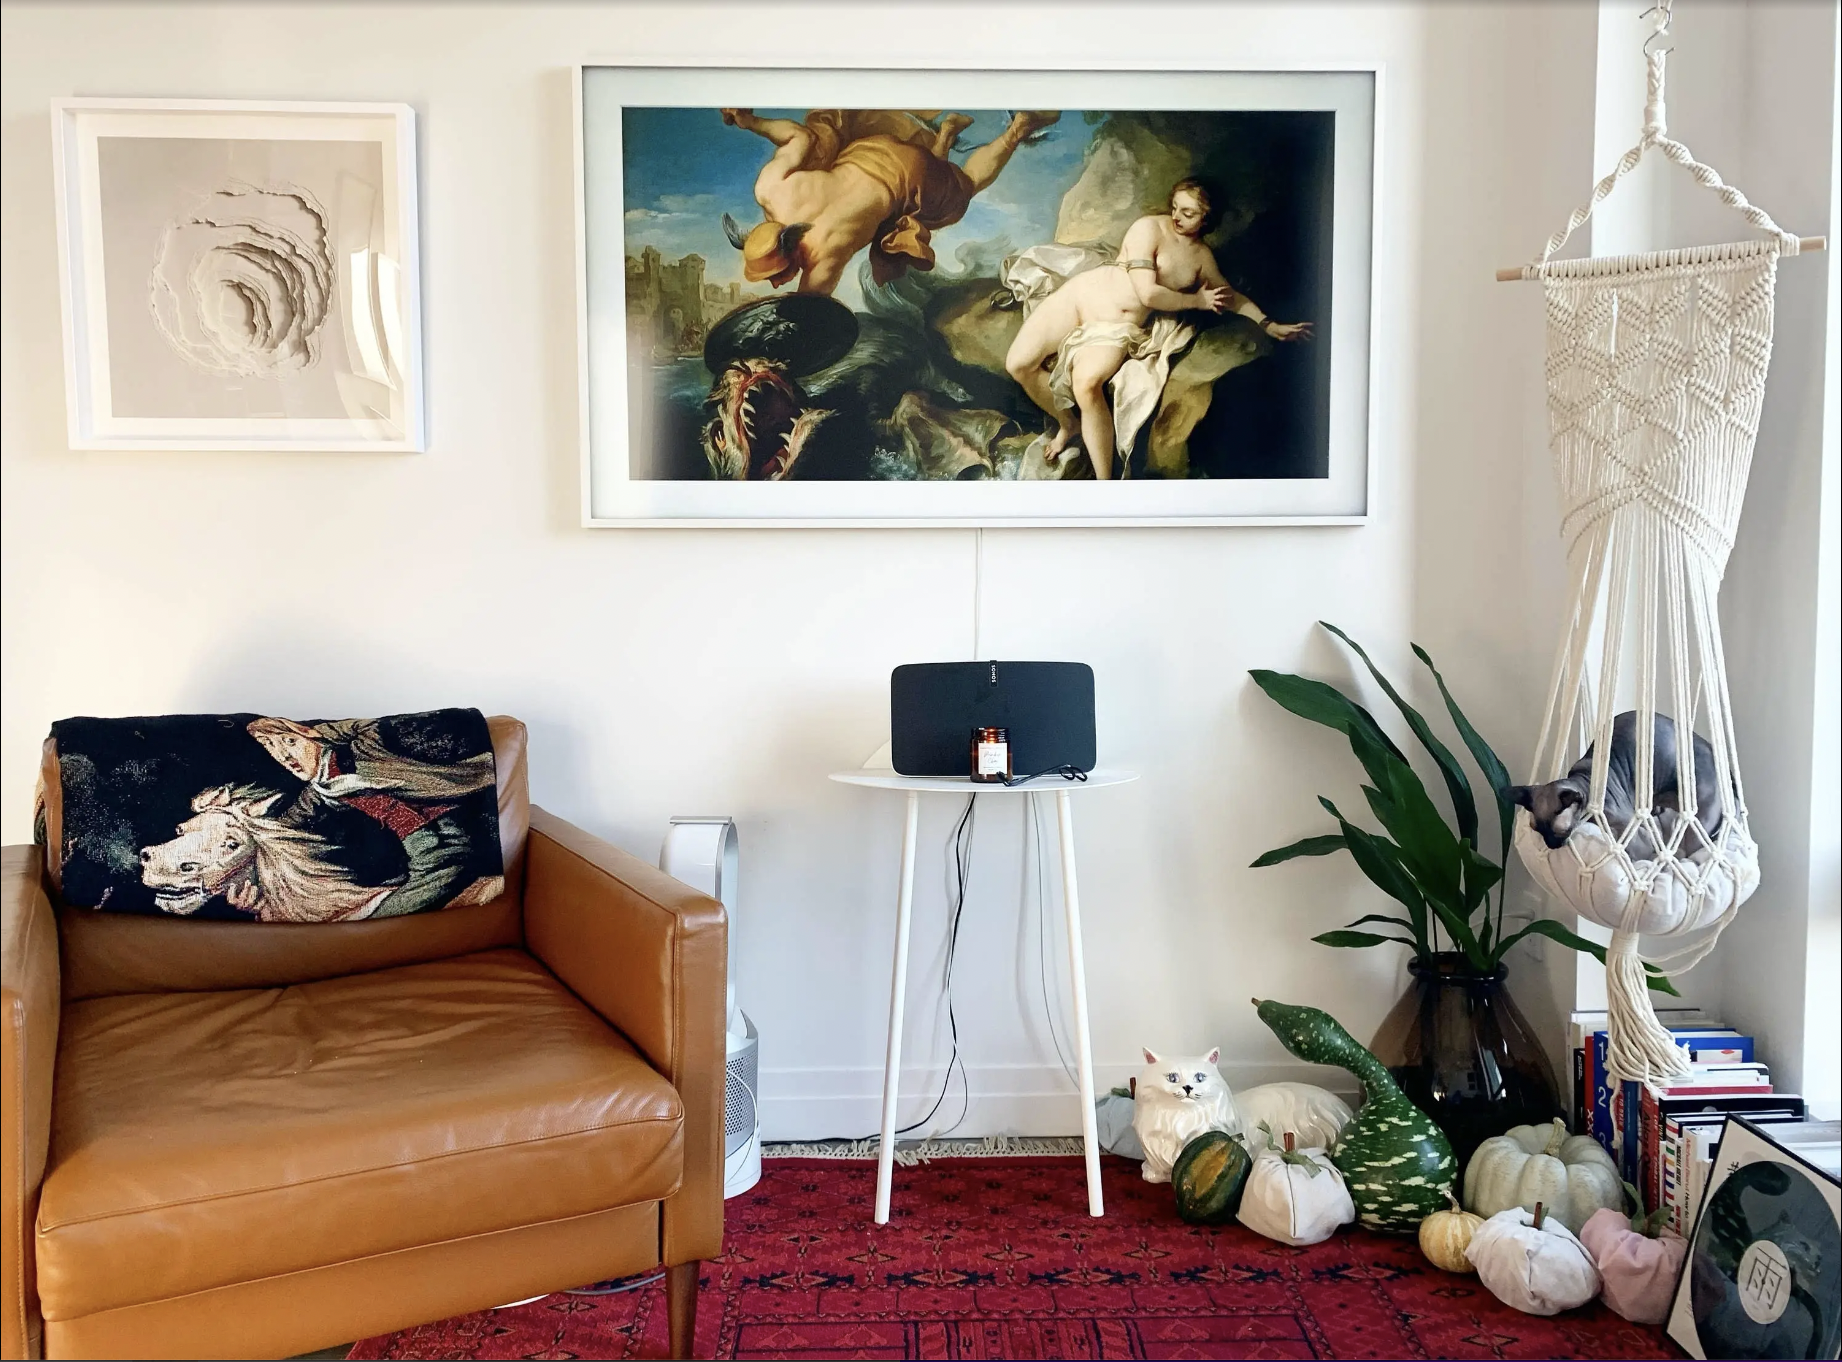 The white framed television in mounted on a wall displaying a painting